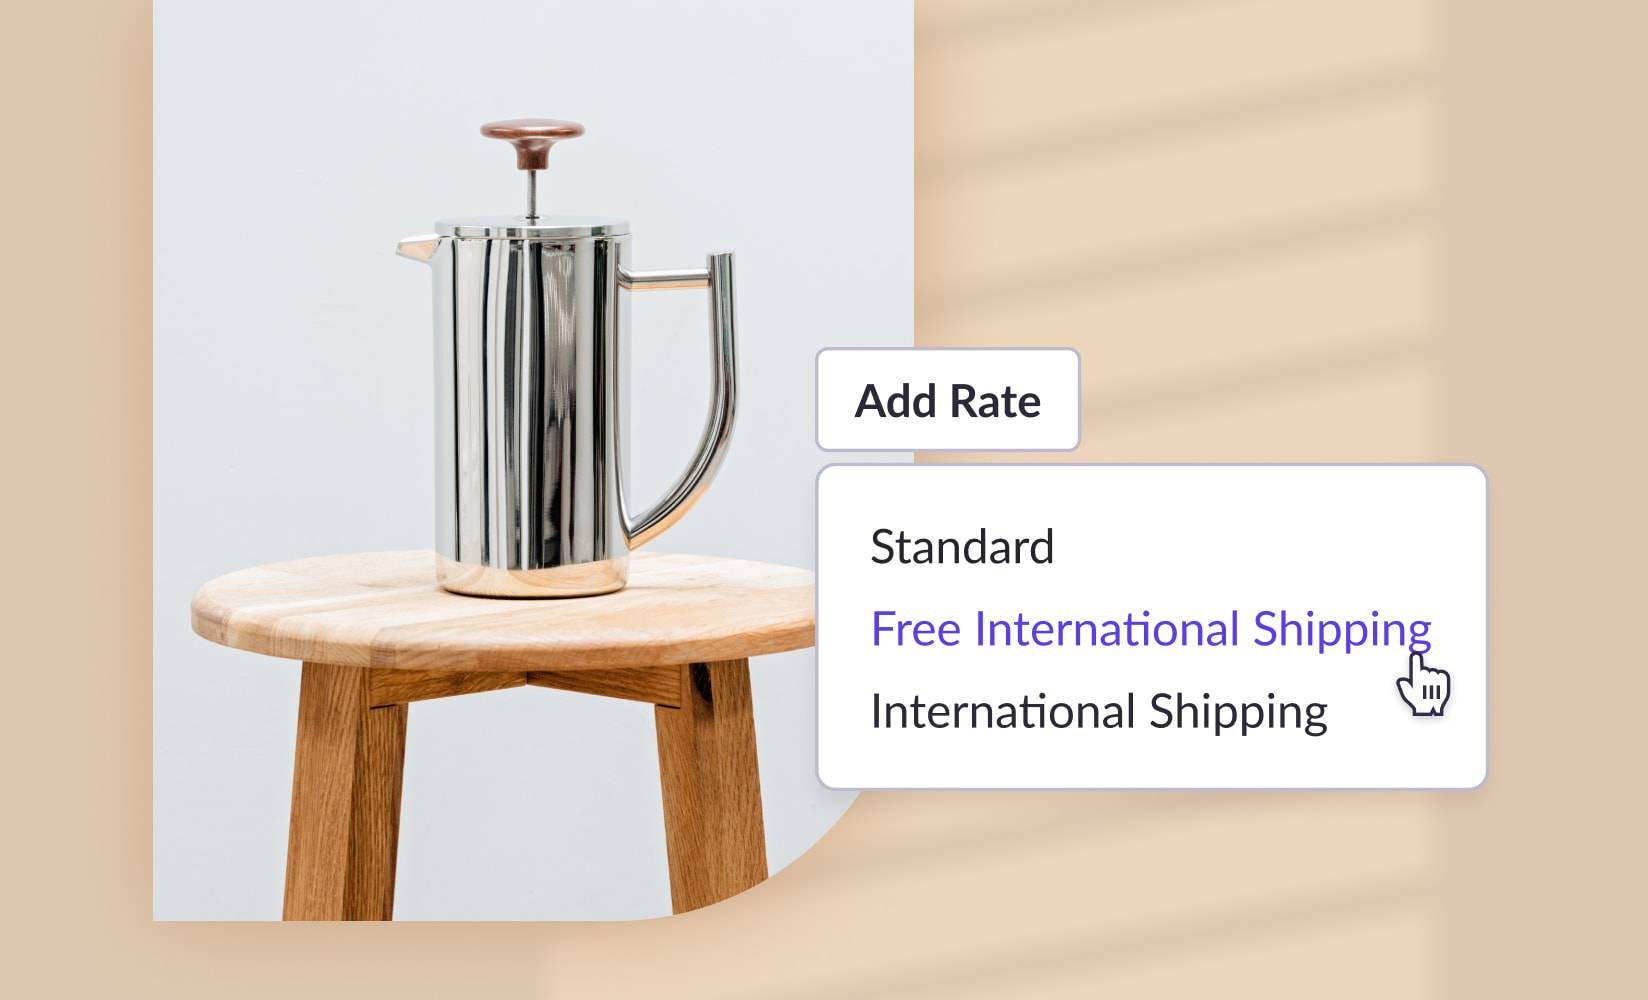 How far will customers go to qualify for free shipping?